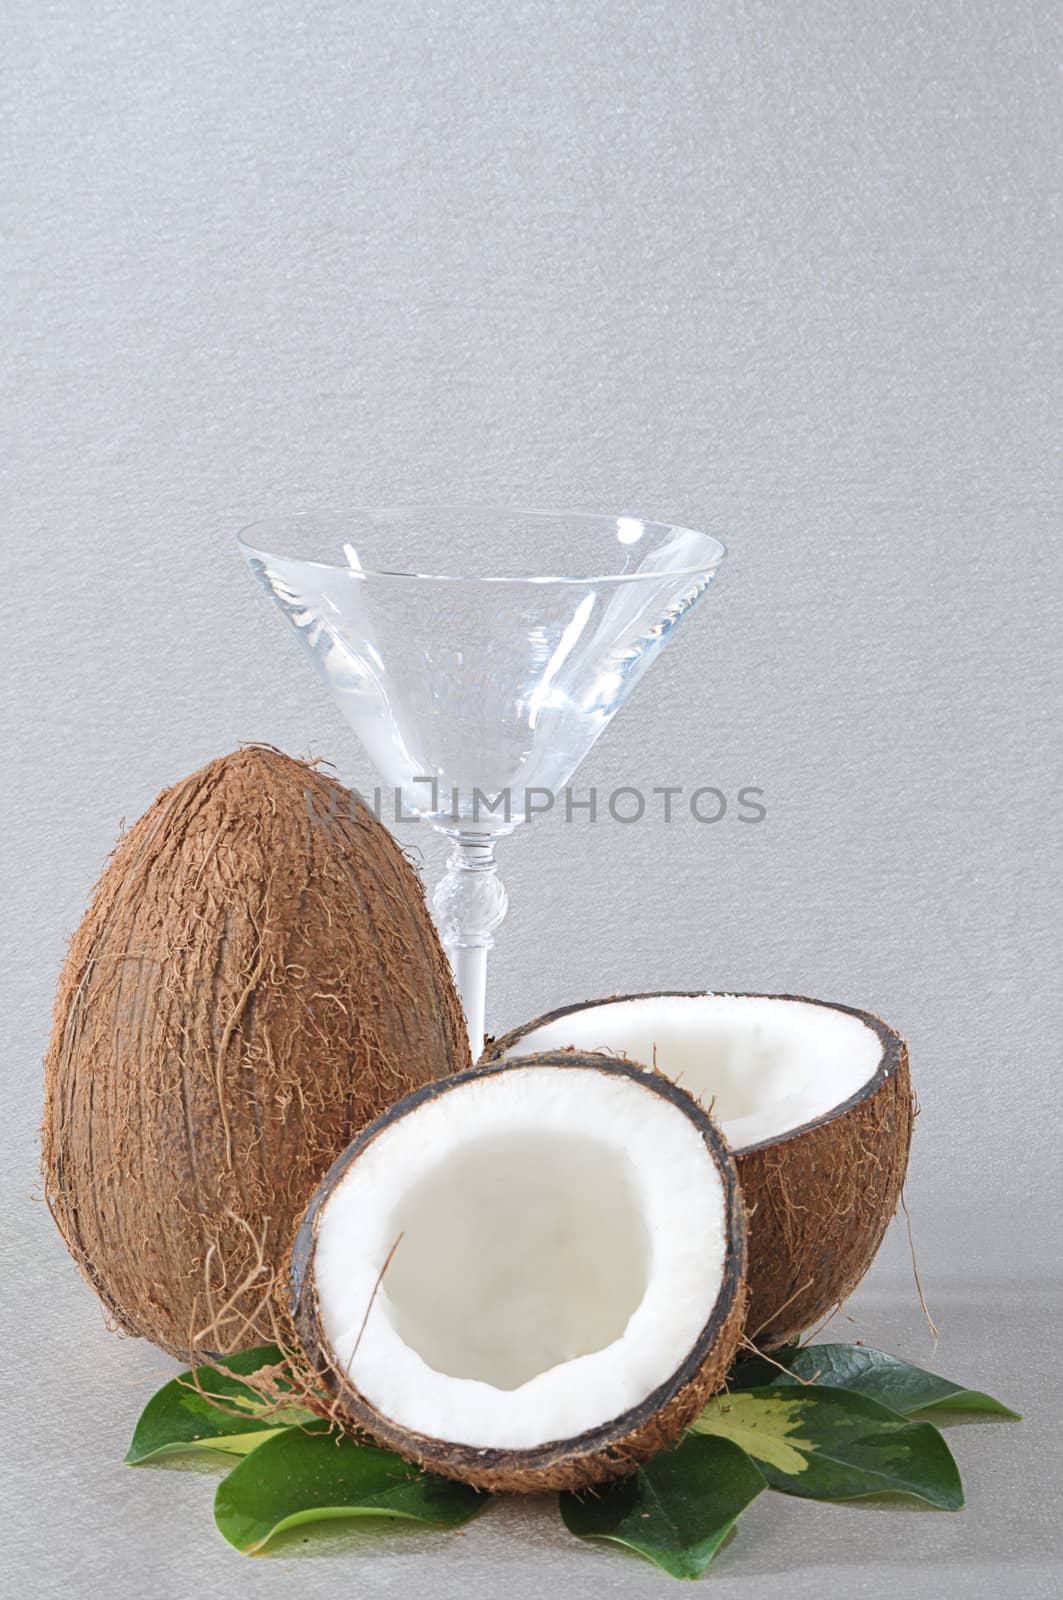 Broken coconut with green plant and empty glass